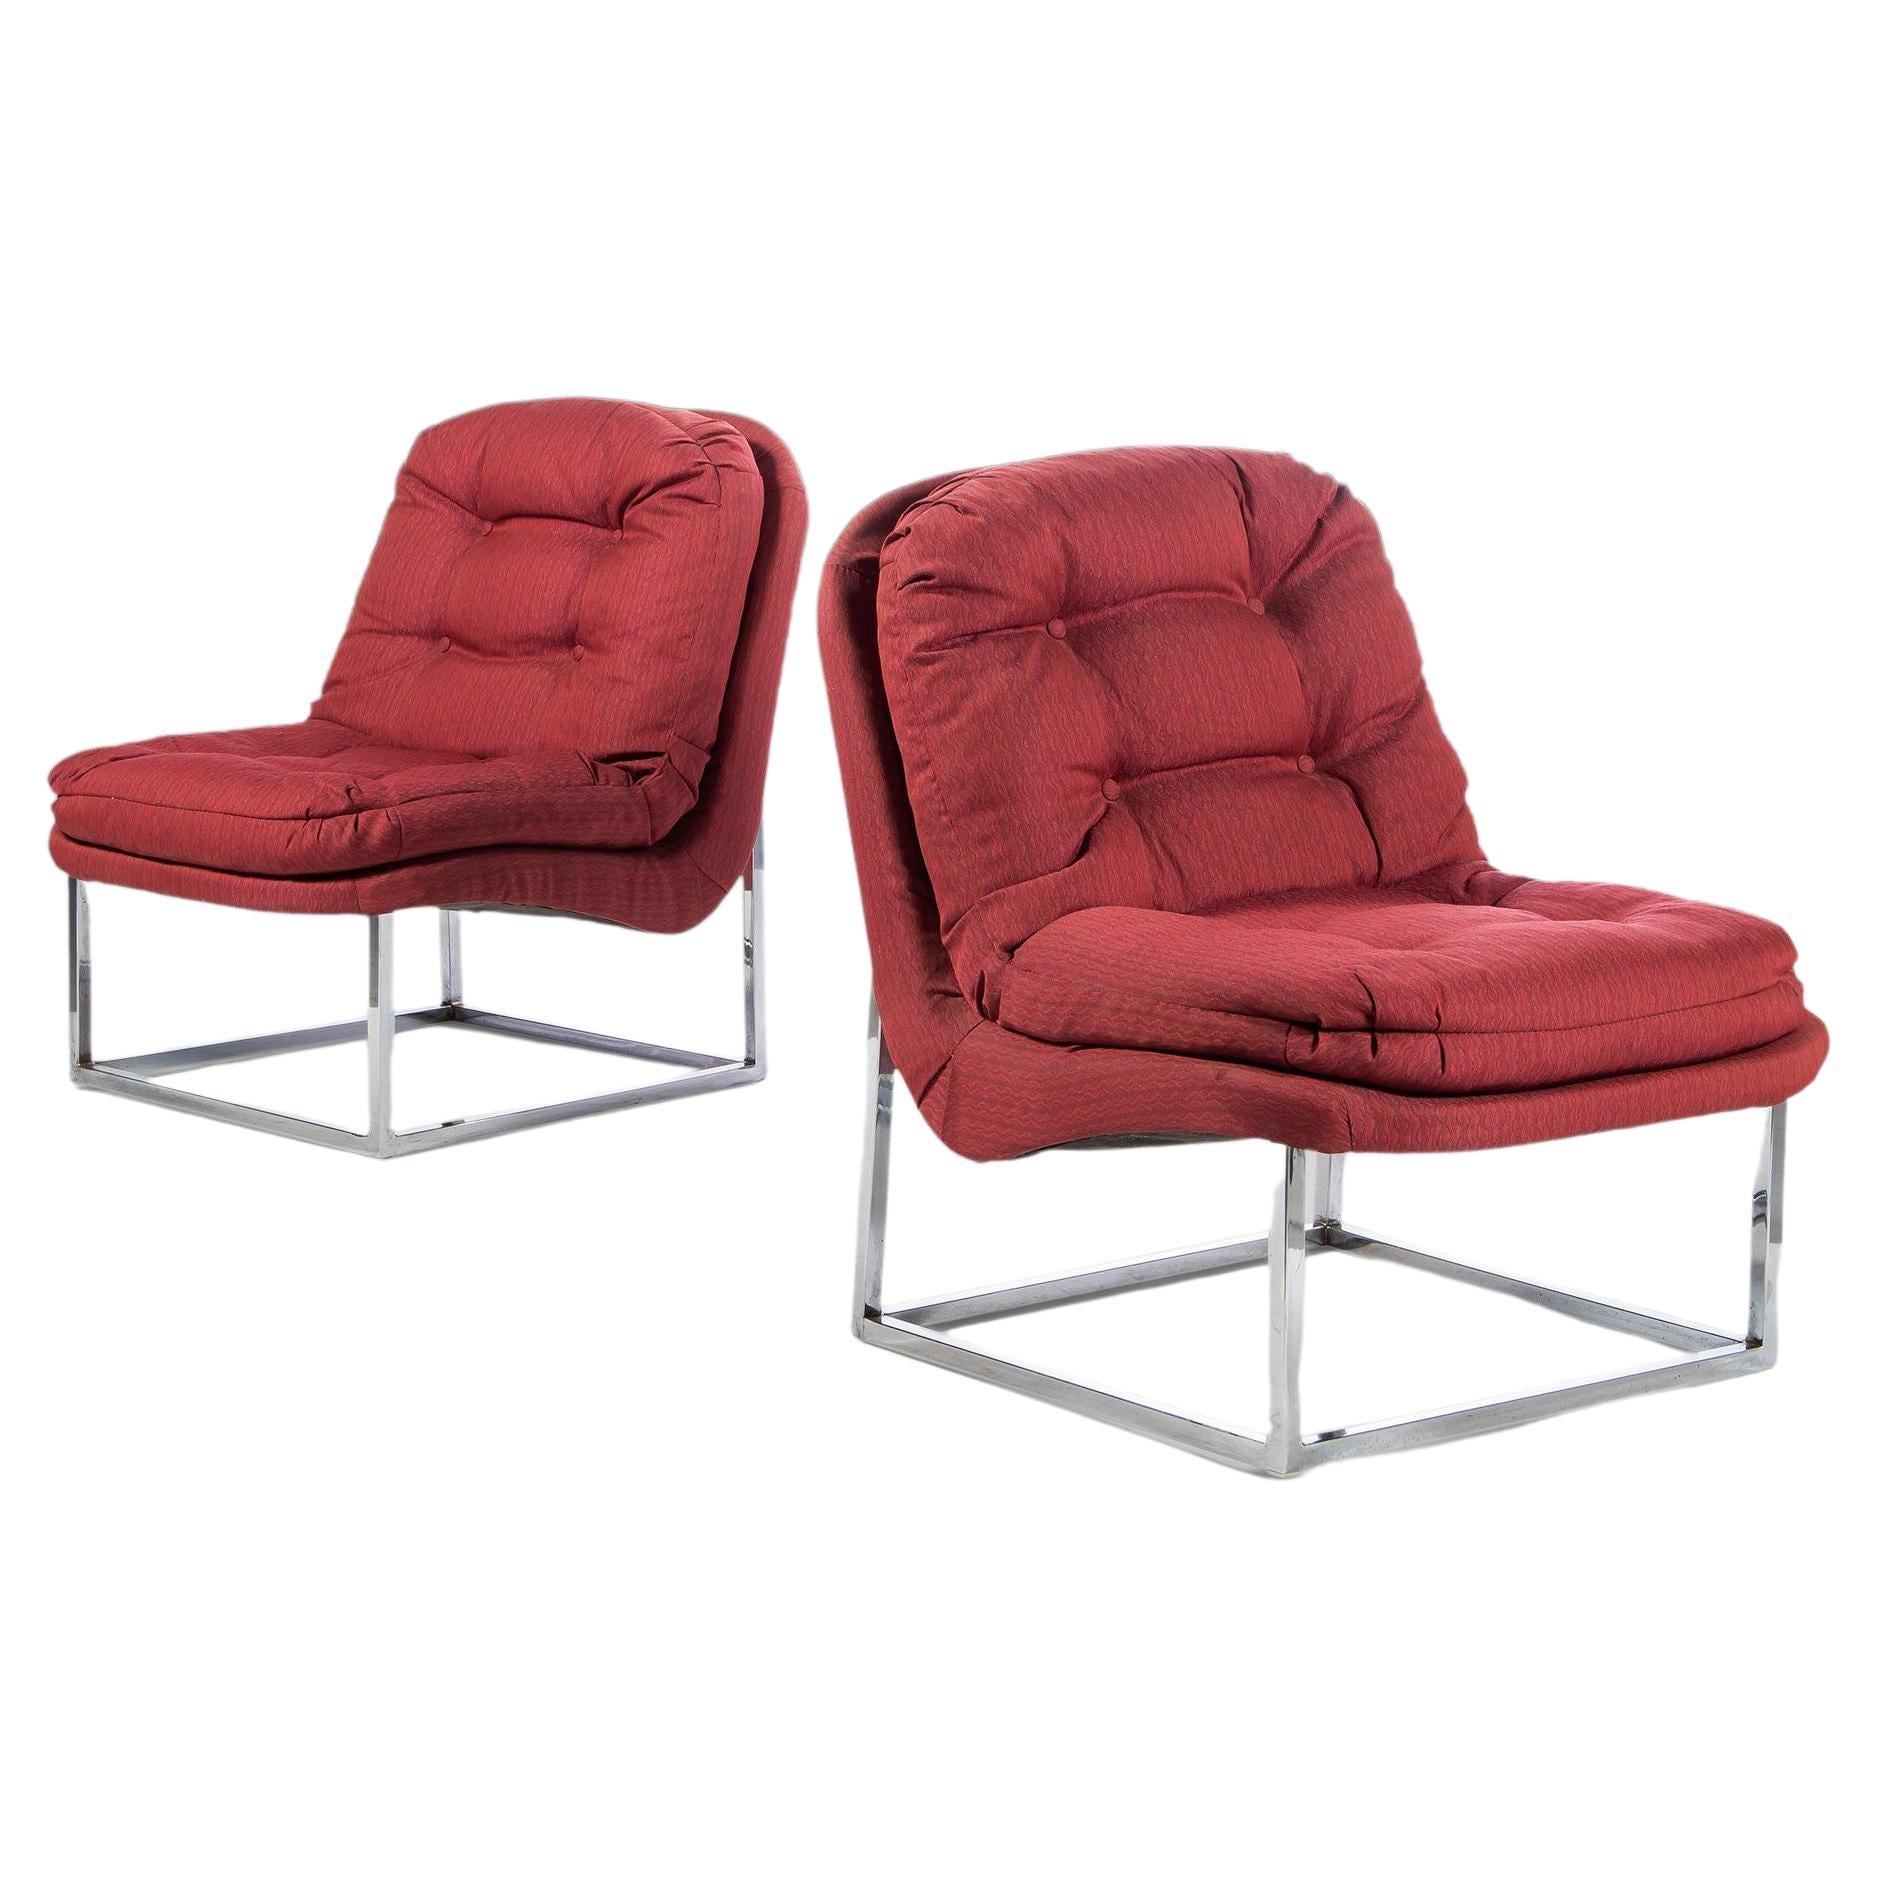 Set of Two '2' Scoop Lounge Chairs Attributed to Milo Baughman, USA, c. 1970's For Sale